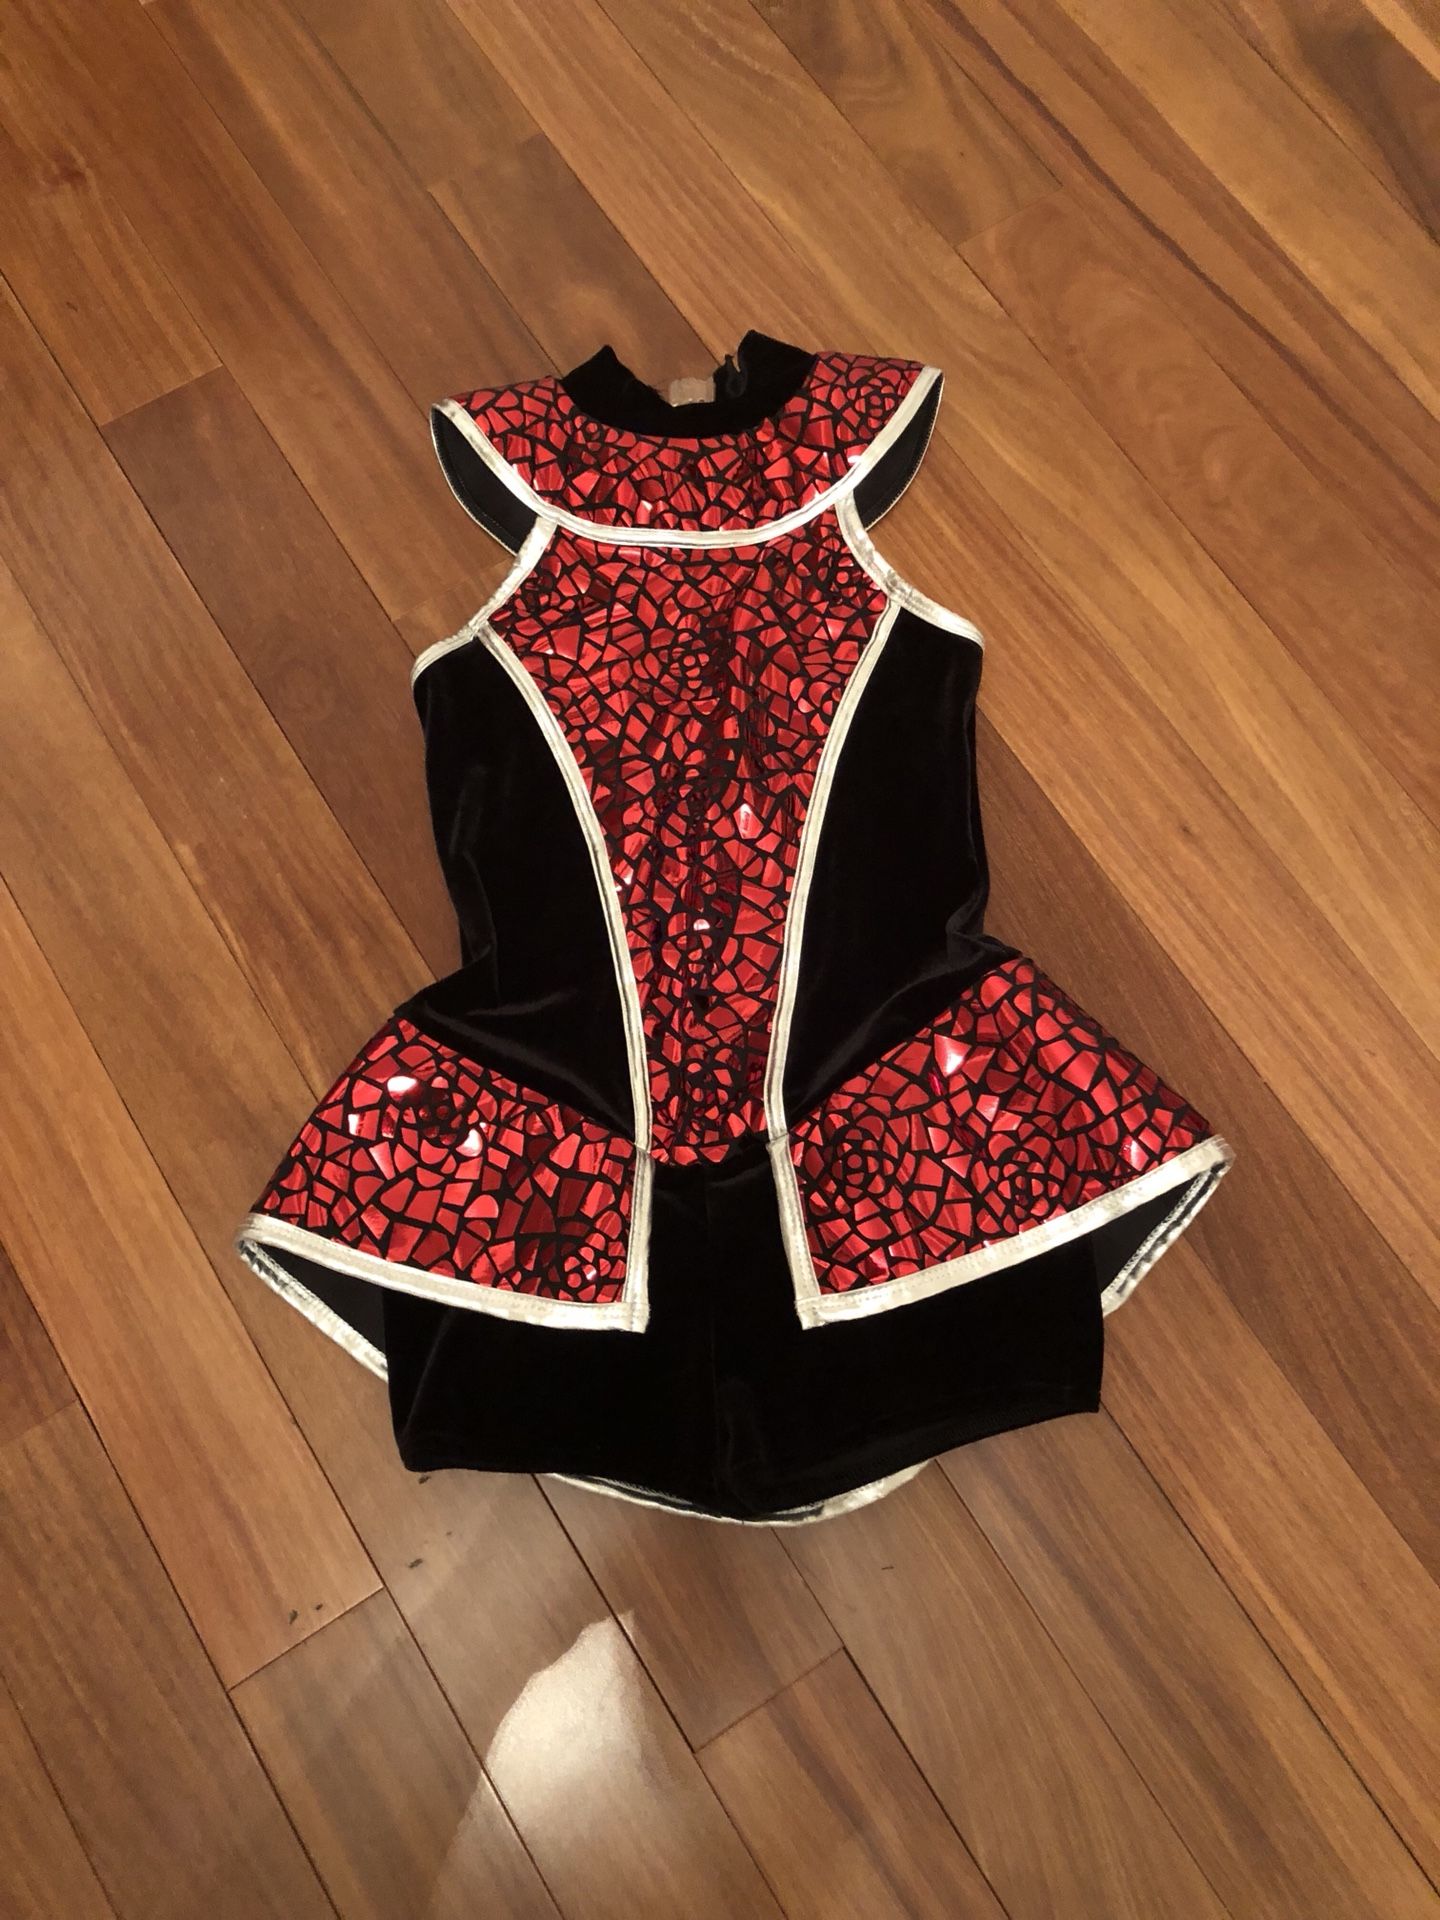 8 dance costumes for girls, ages 9-11, each 20 dollars each